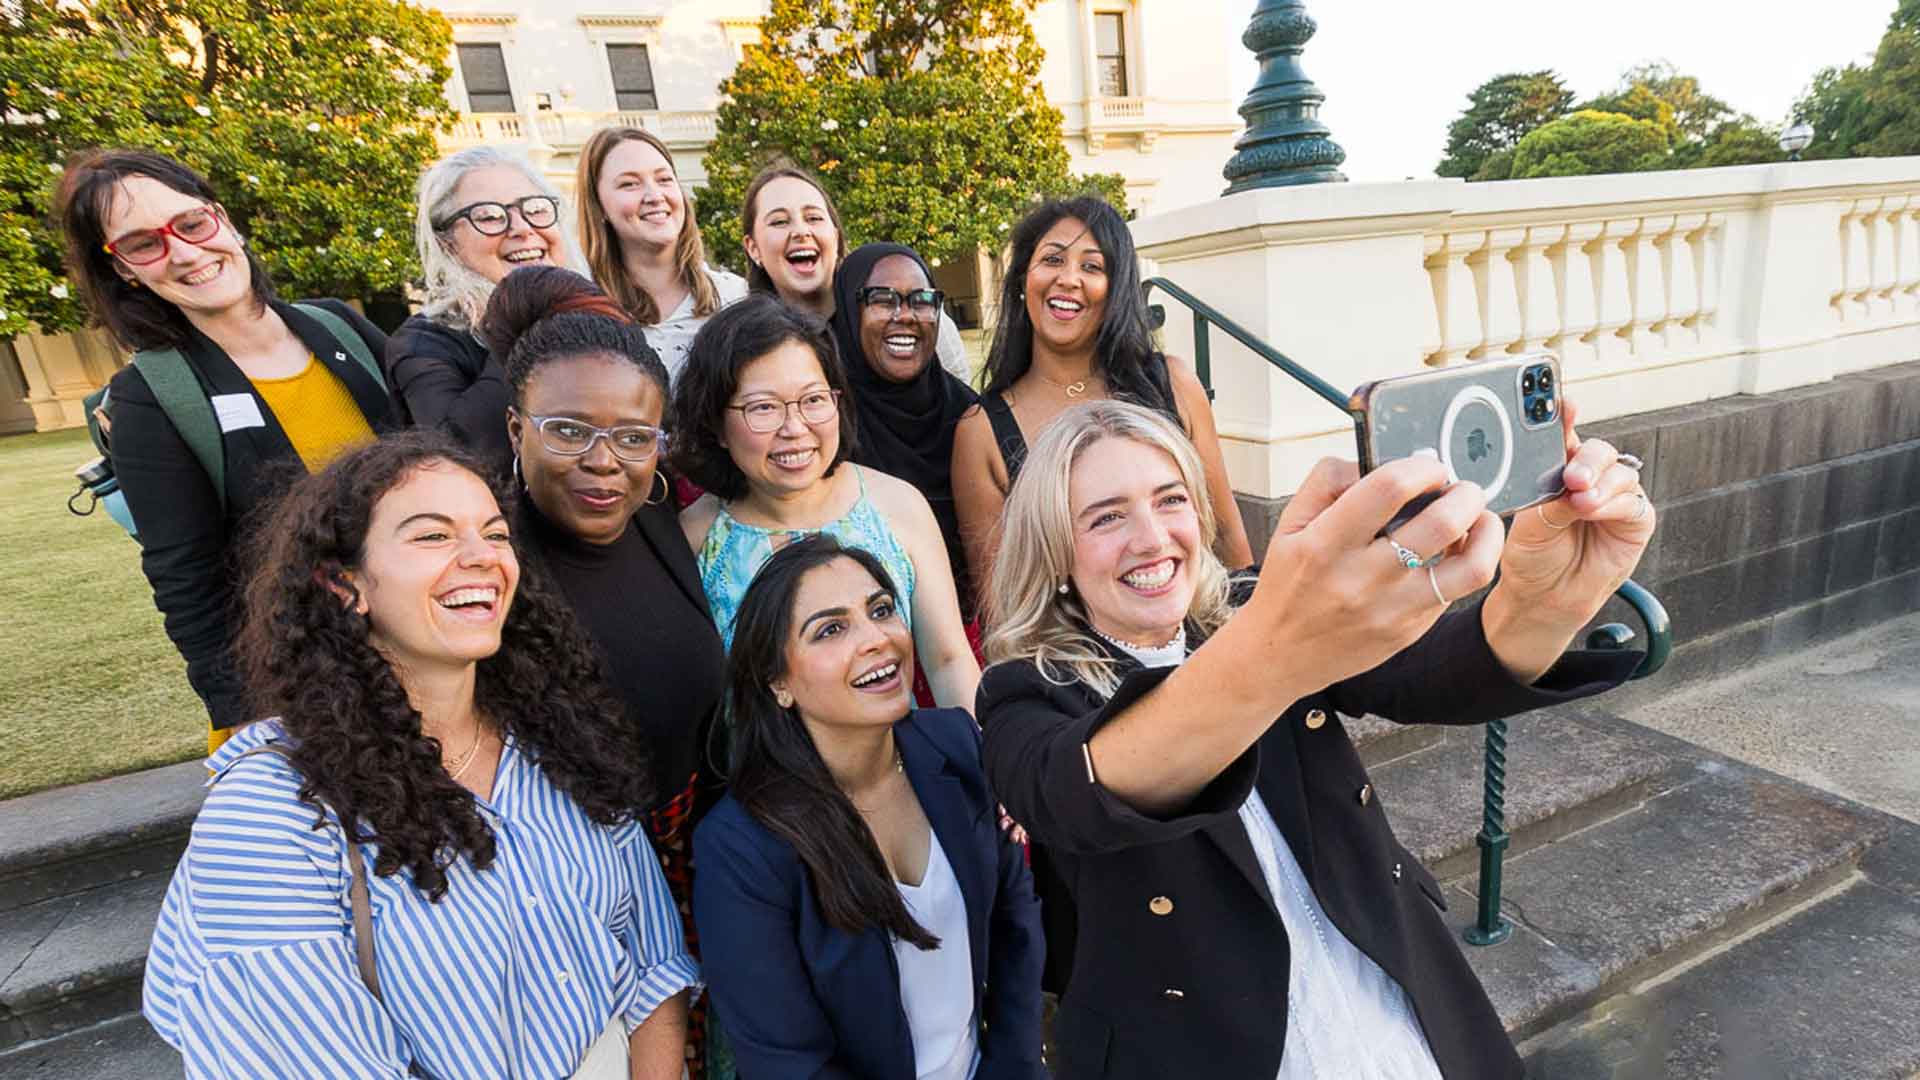 Group of 11 culturally diverse women smiling outside Victoria's government house building and lawn. One of them has her phone held up to take a selfie of the group.